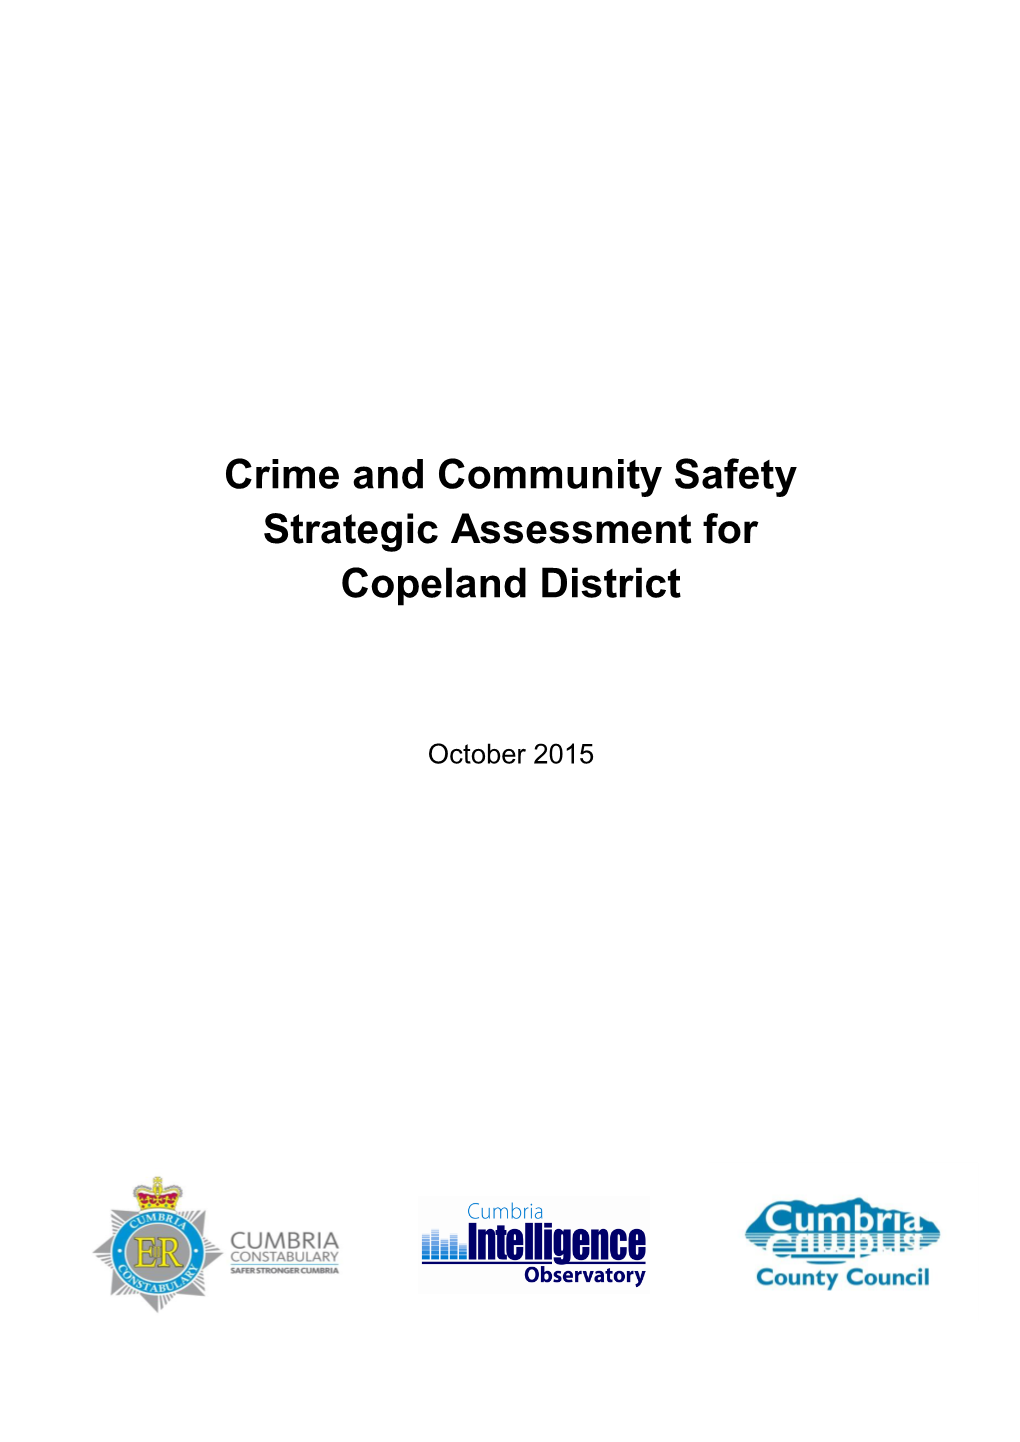 Crime and Community Safety Strategic Assessment for Copeland District